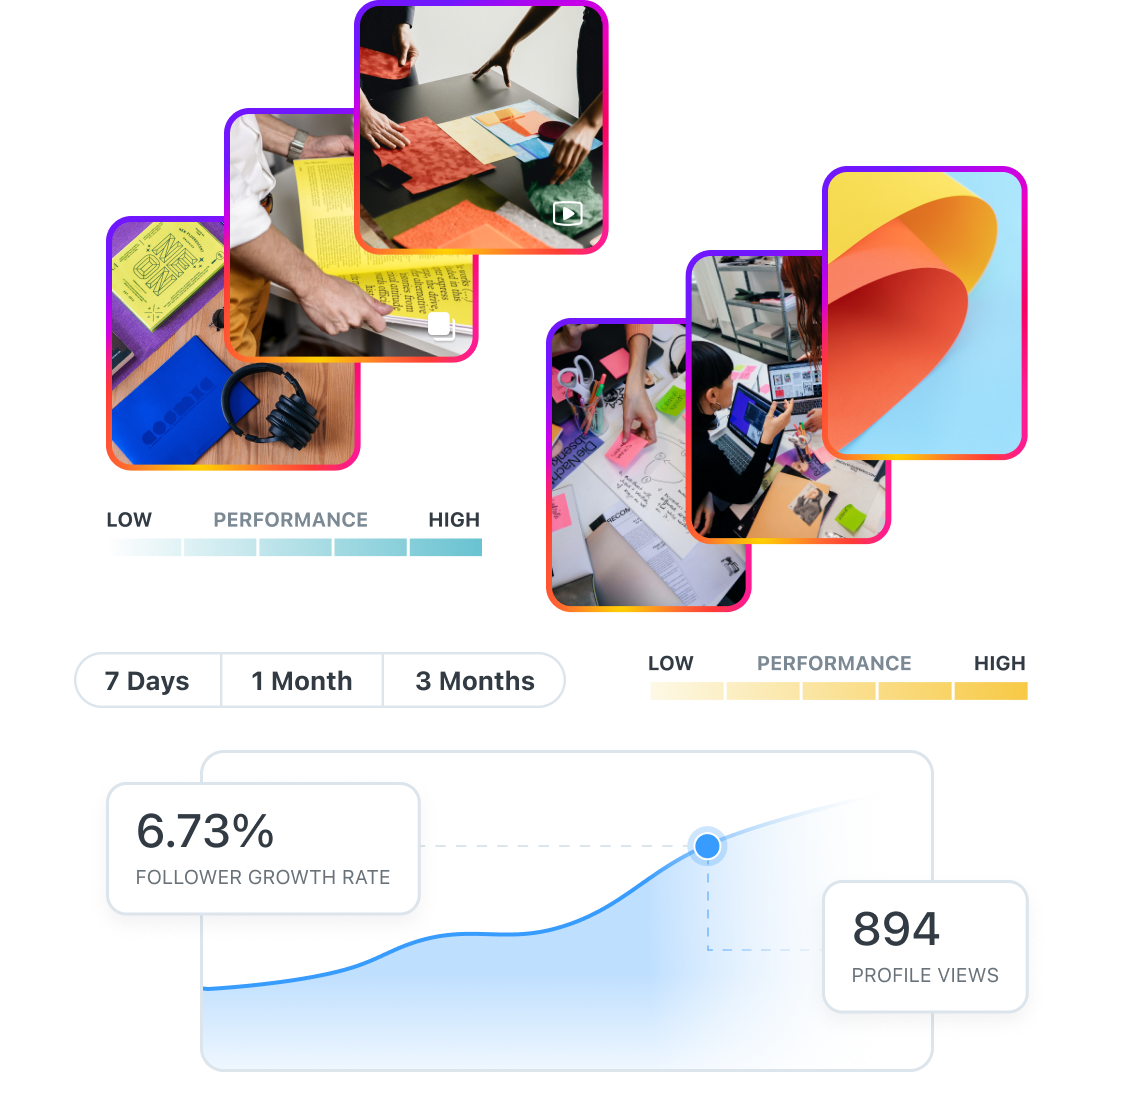 Laters analytics tool allows you to measure and compare social media performance over time